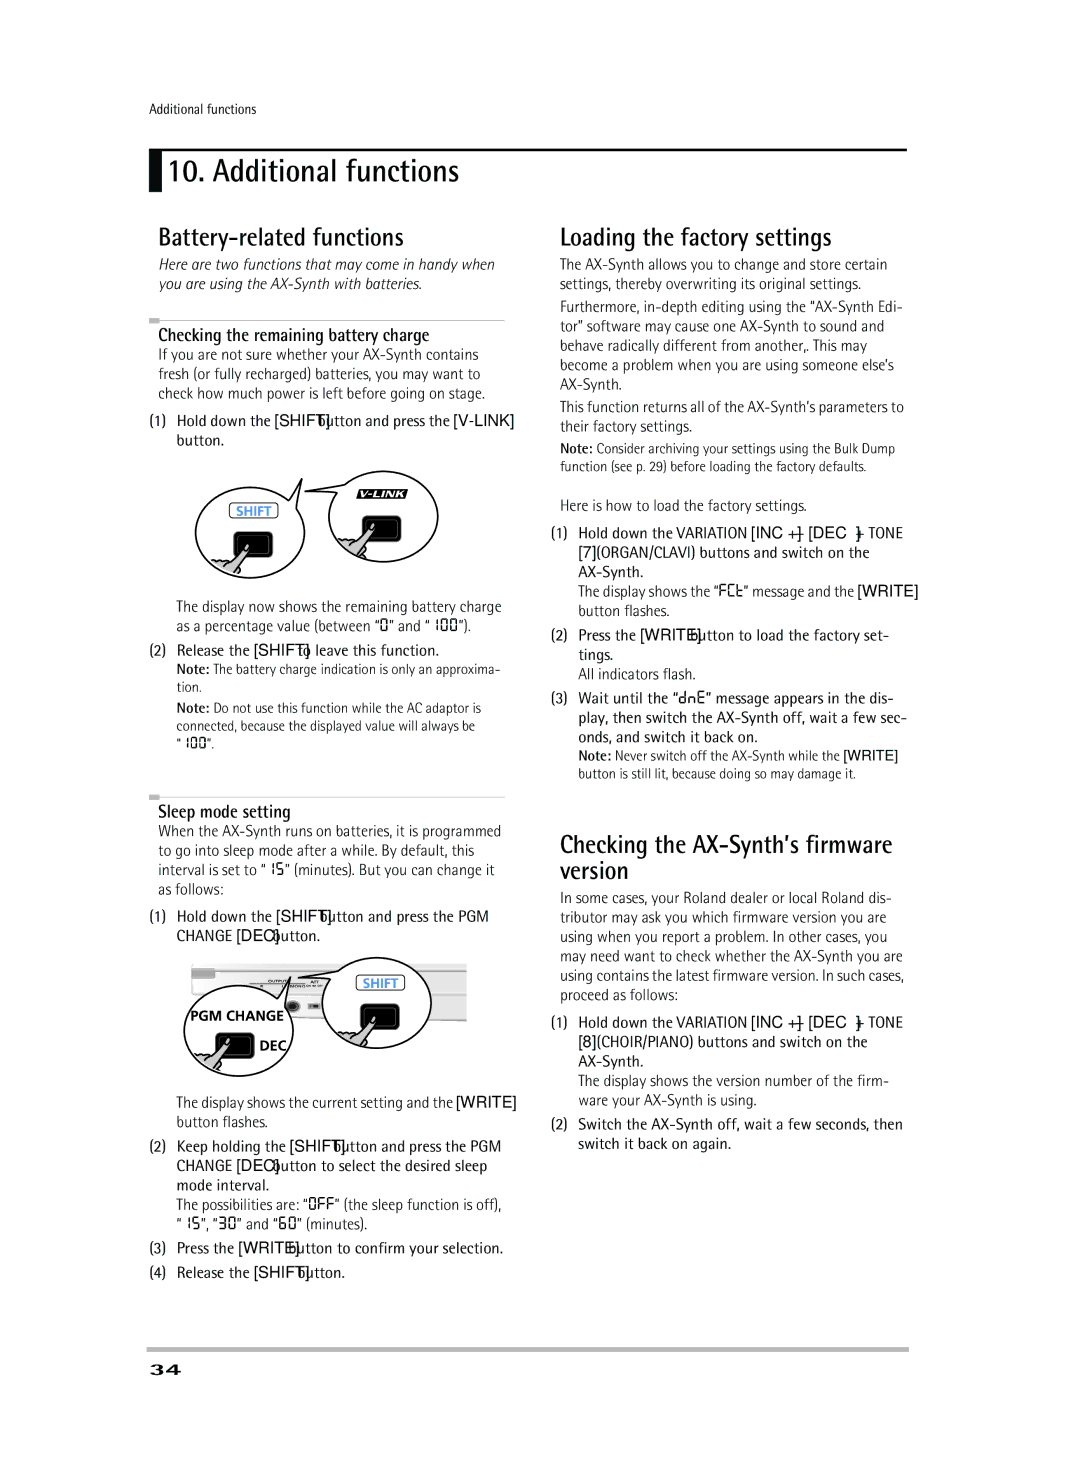 Roland owner manual Battery-related functions, Loading the factory settings, Checking the AX-Synth’s firmware version 